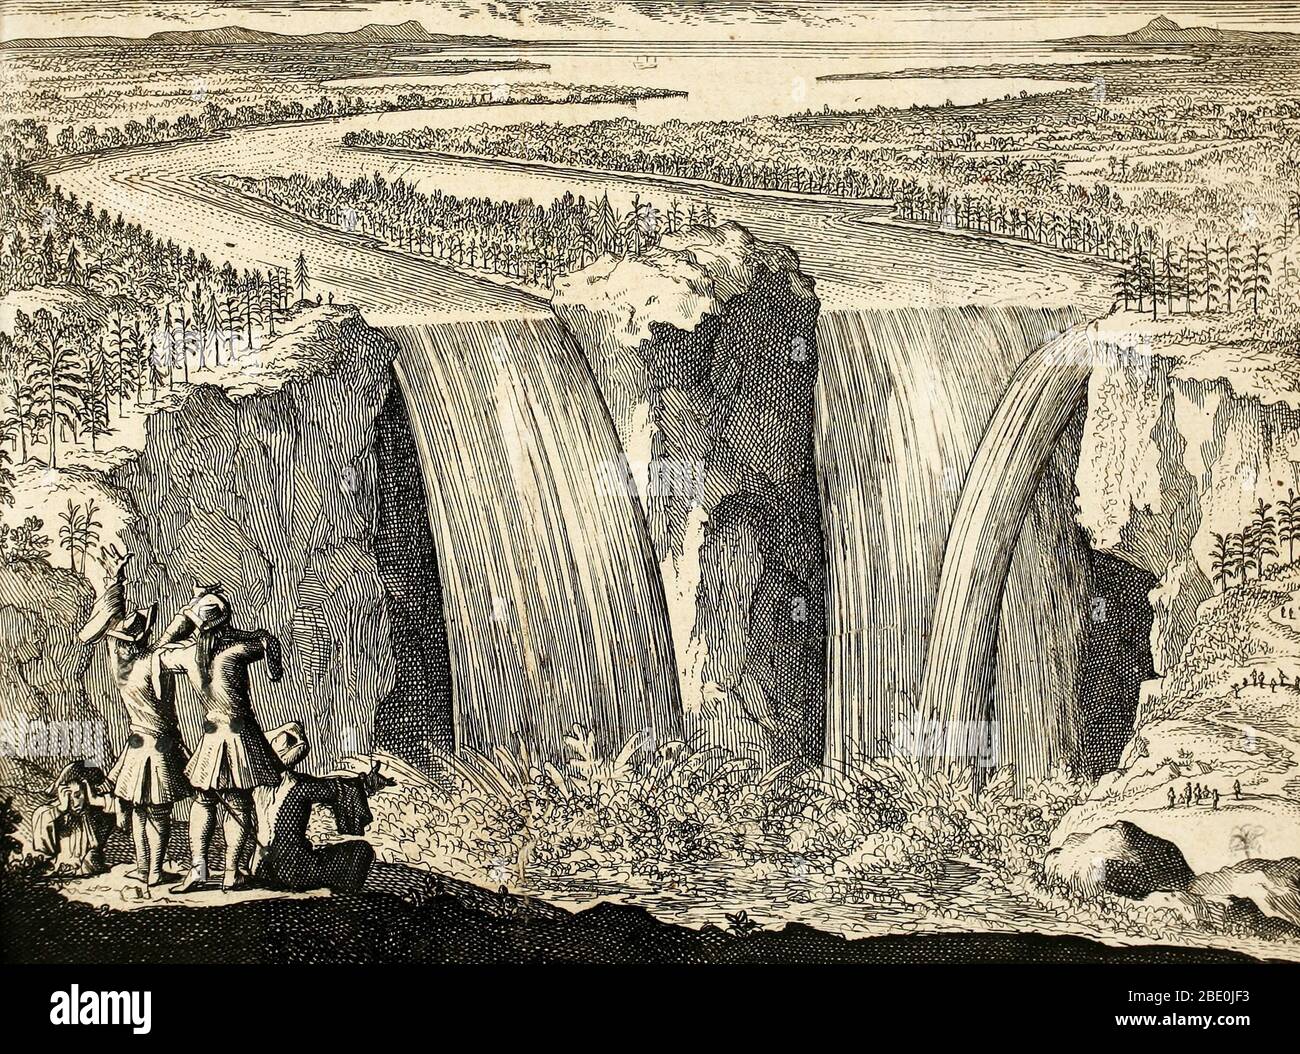 Depiction of Niagara Falls by Louis Hennepin, 1698. Father Louis Hennepin (1626-1704) was a Roman Catholic priest and missionary of the Franciscan Recollet order and an explorer of the interior of North America. Two great waterfalls were brought to the world's attention by Hennepin: Niagara Falls, with the most voluminous flow of any in North America, and the Saint Anthony Falls in what is now Minneapolis, the only waterfall on the Mississippi River. In 1683, he published a book about Niagara Falls called A New Discovery. Stock Photo